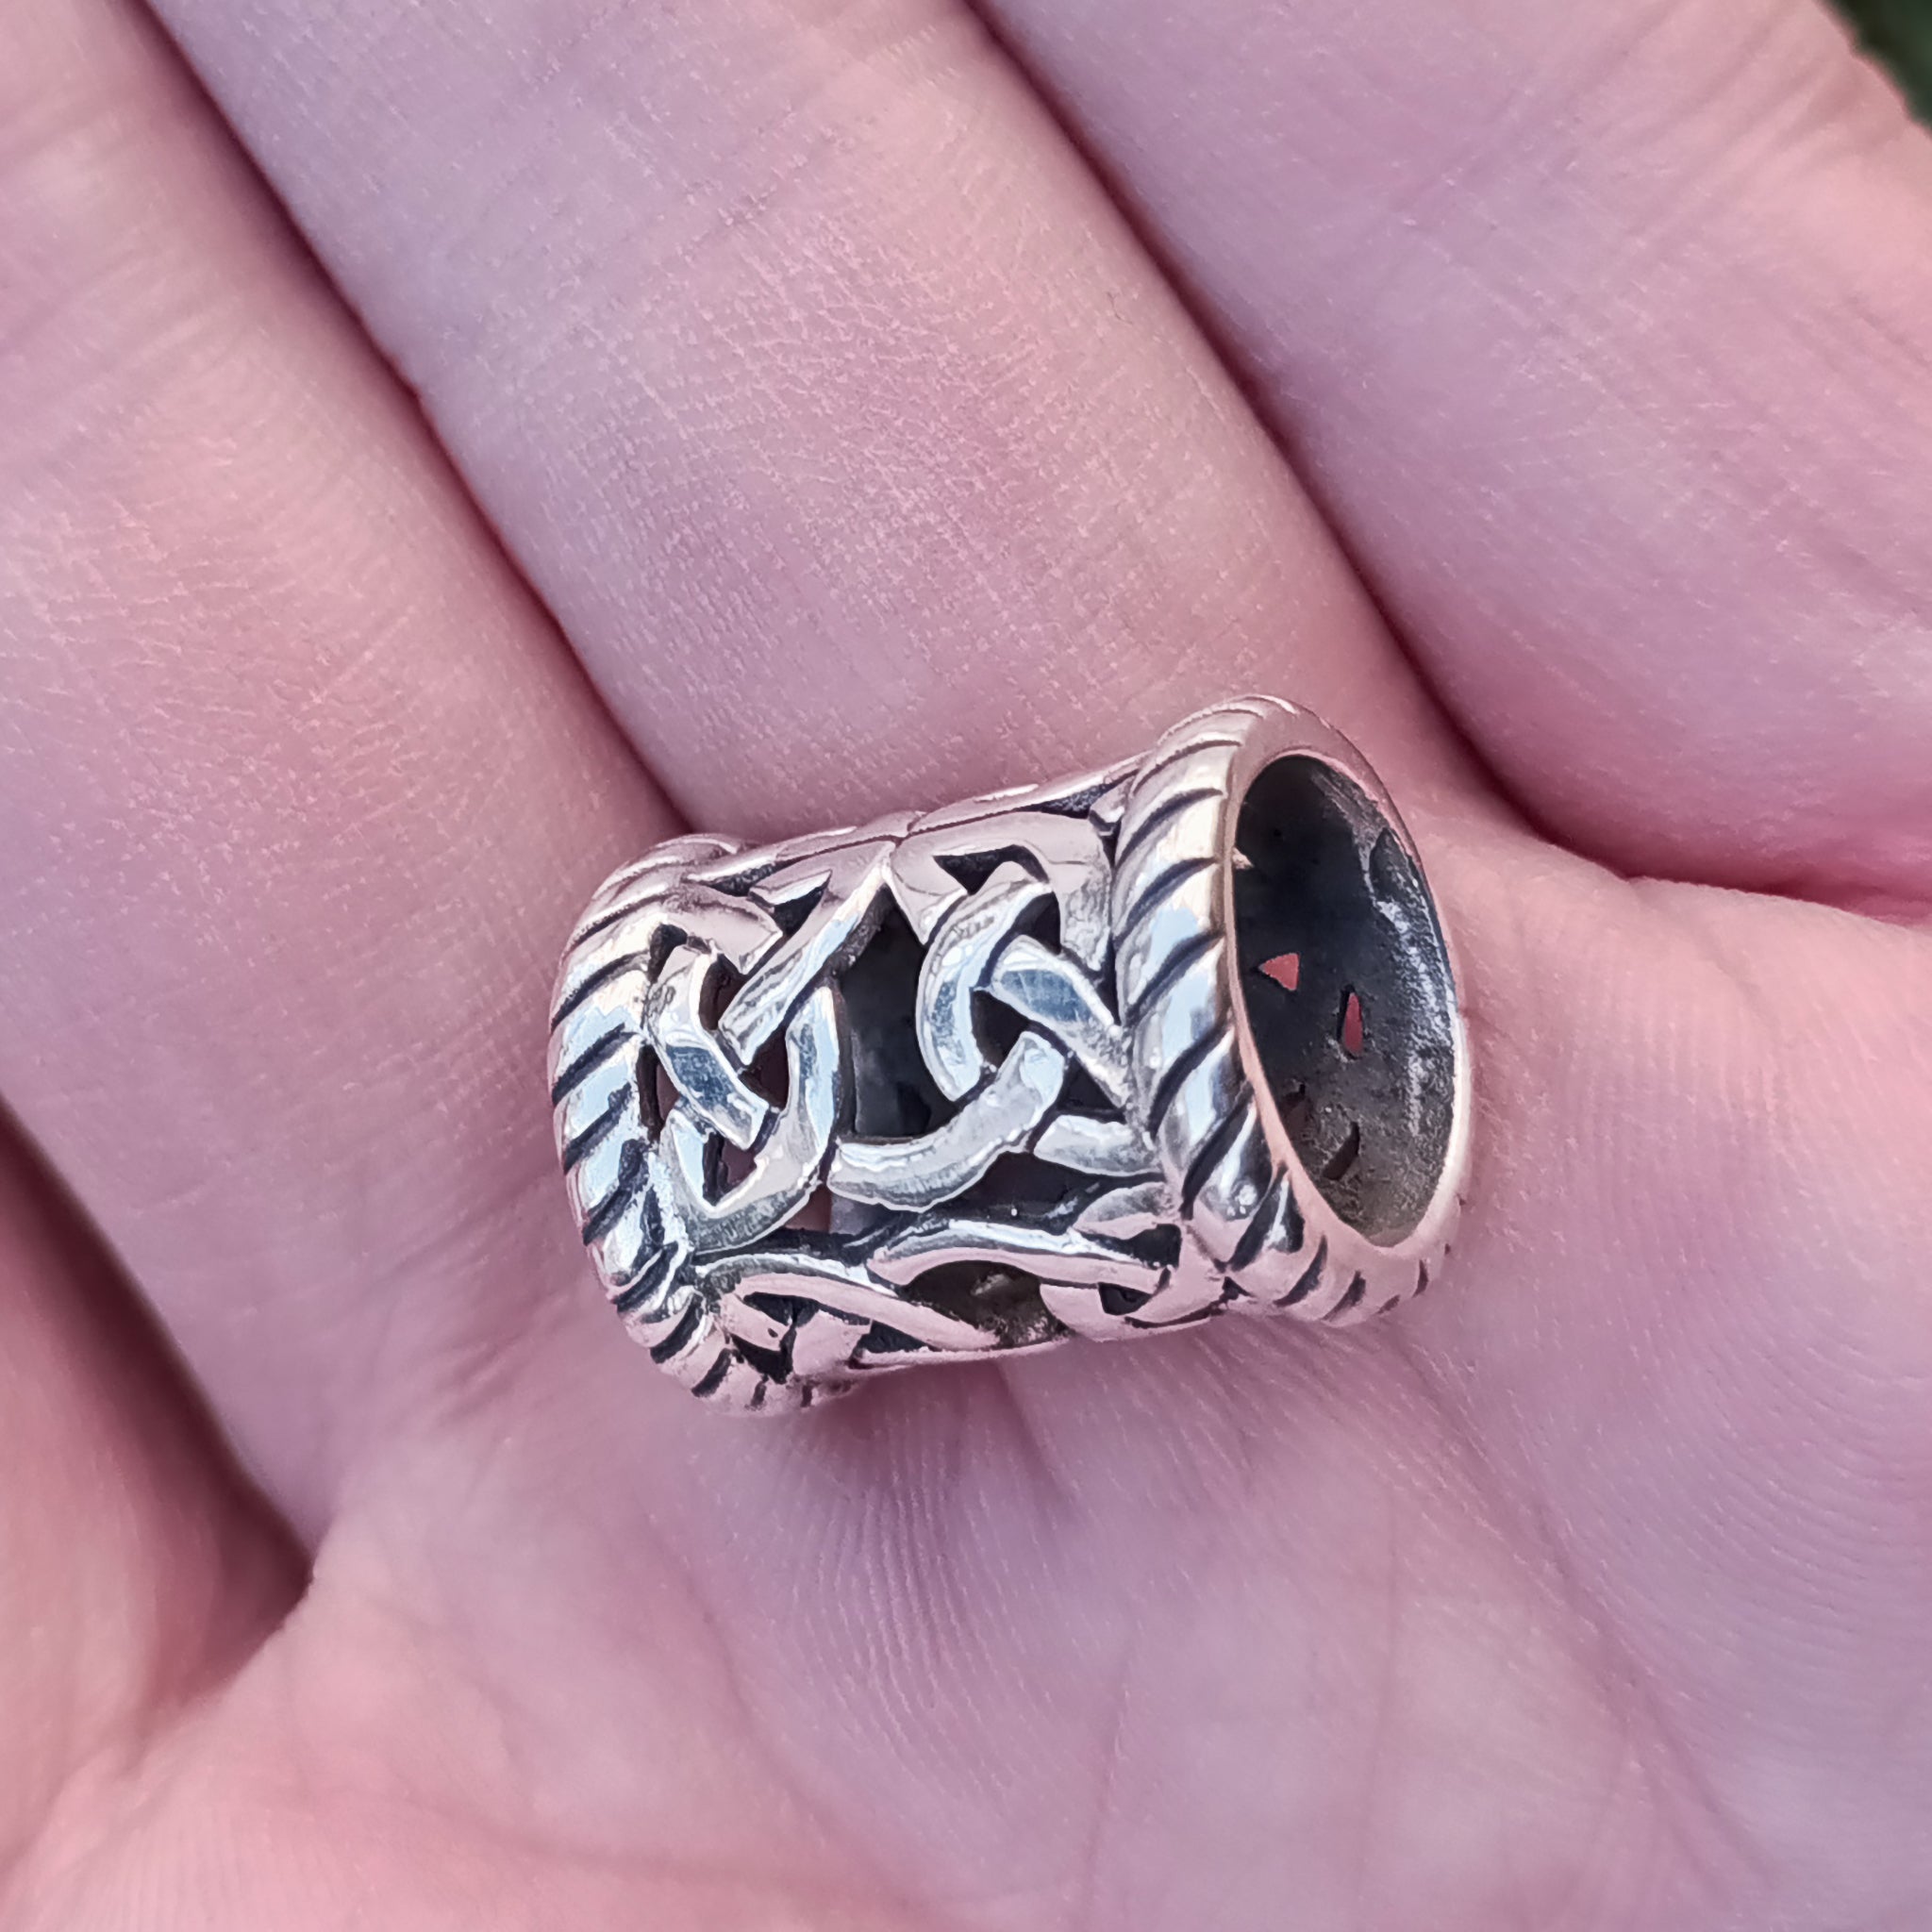 Large Openwork Viking Beard Ring in Silver on Hand - Angle